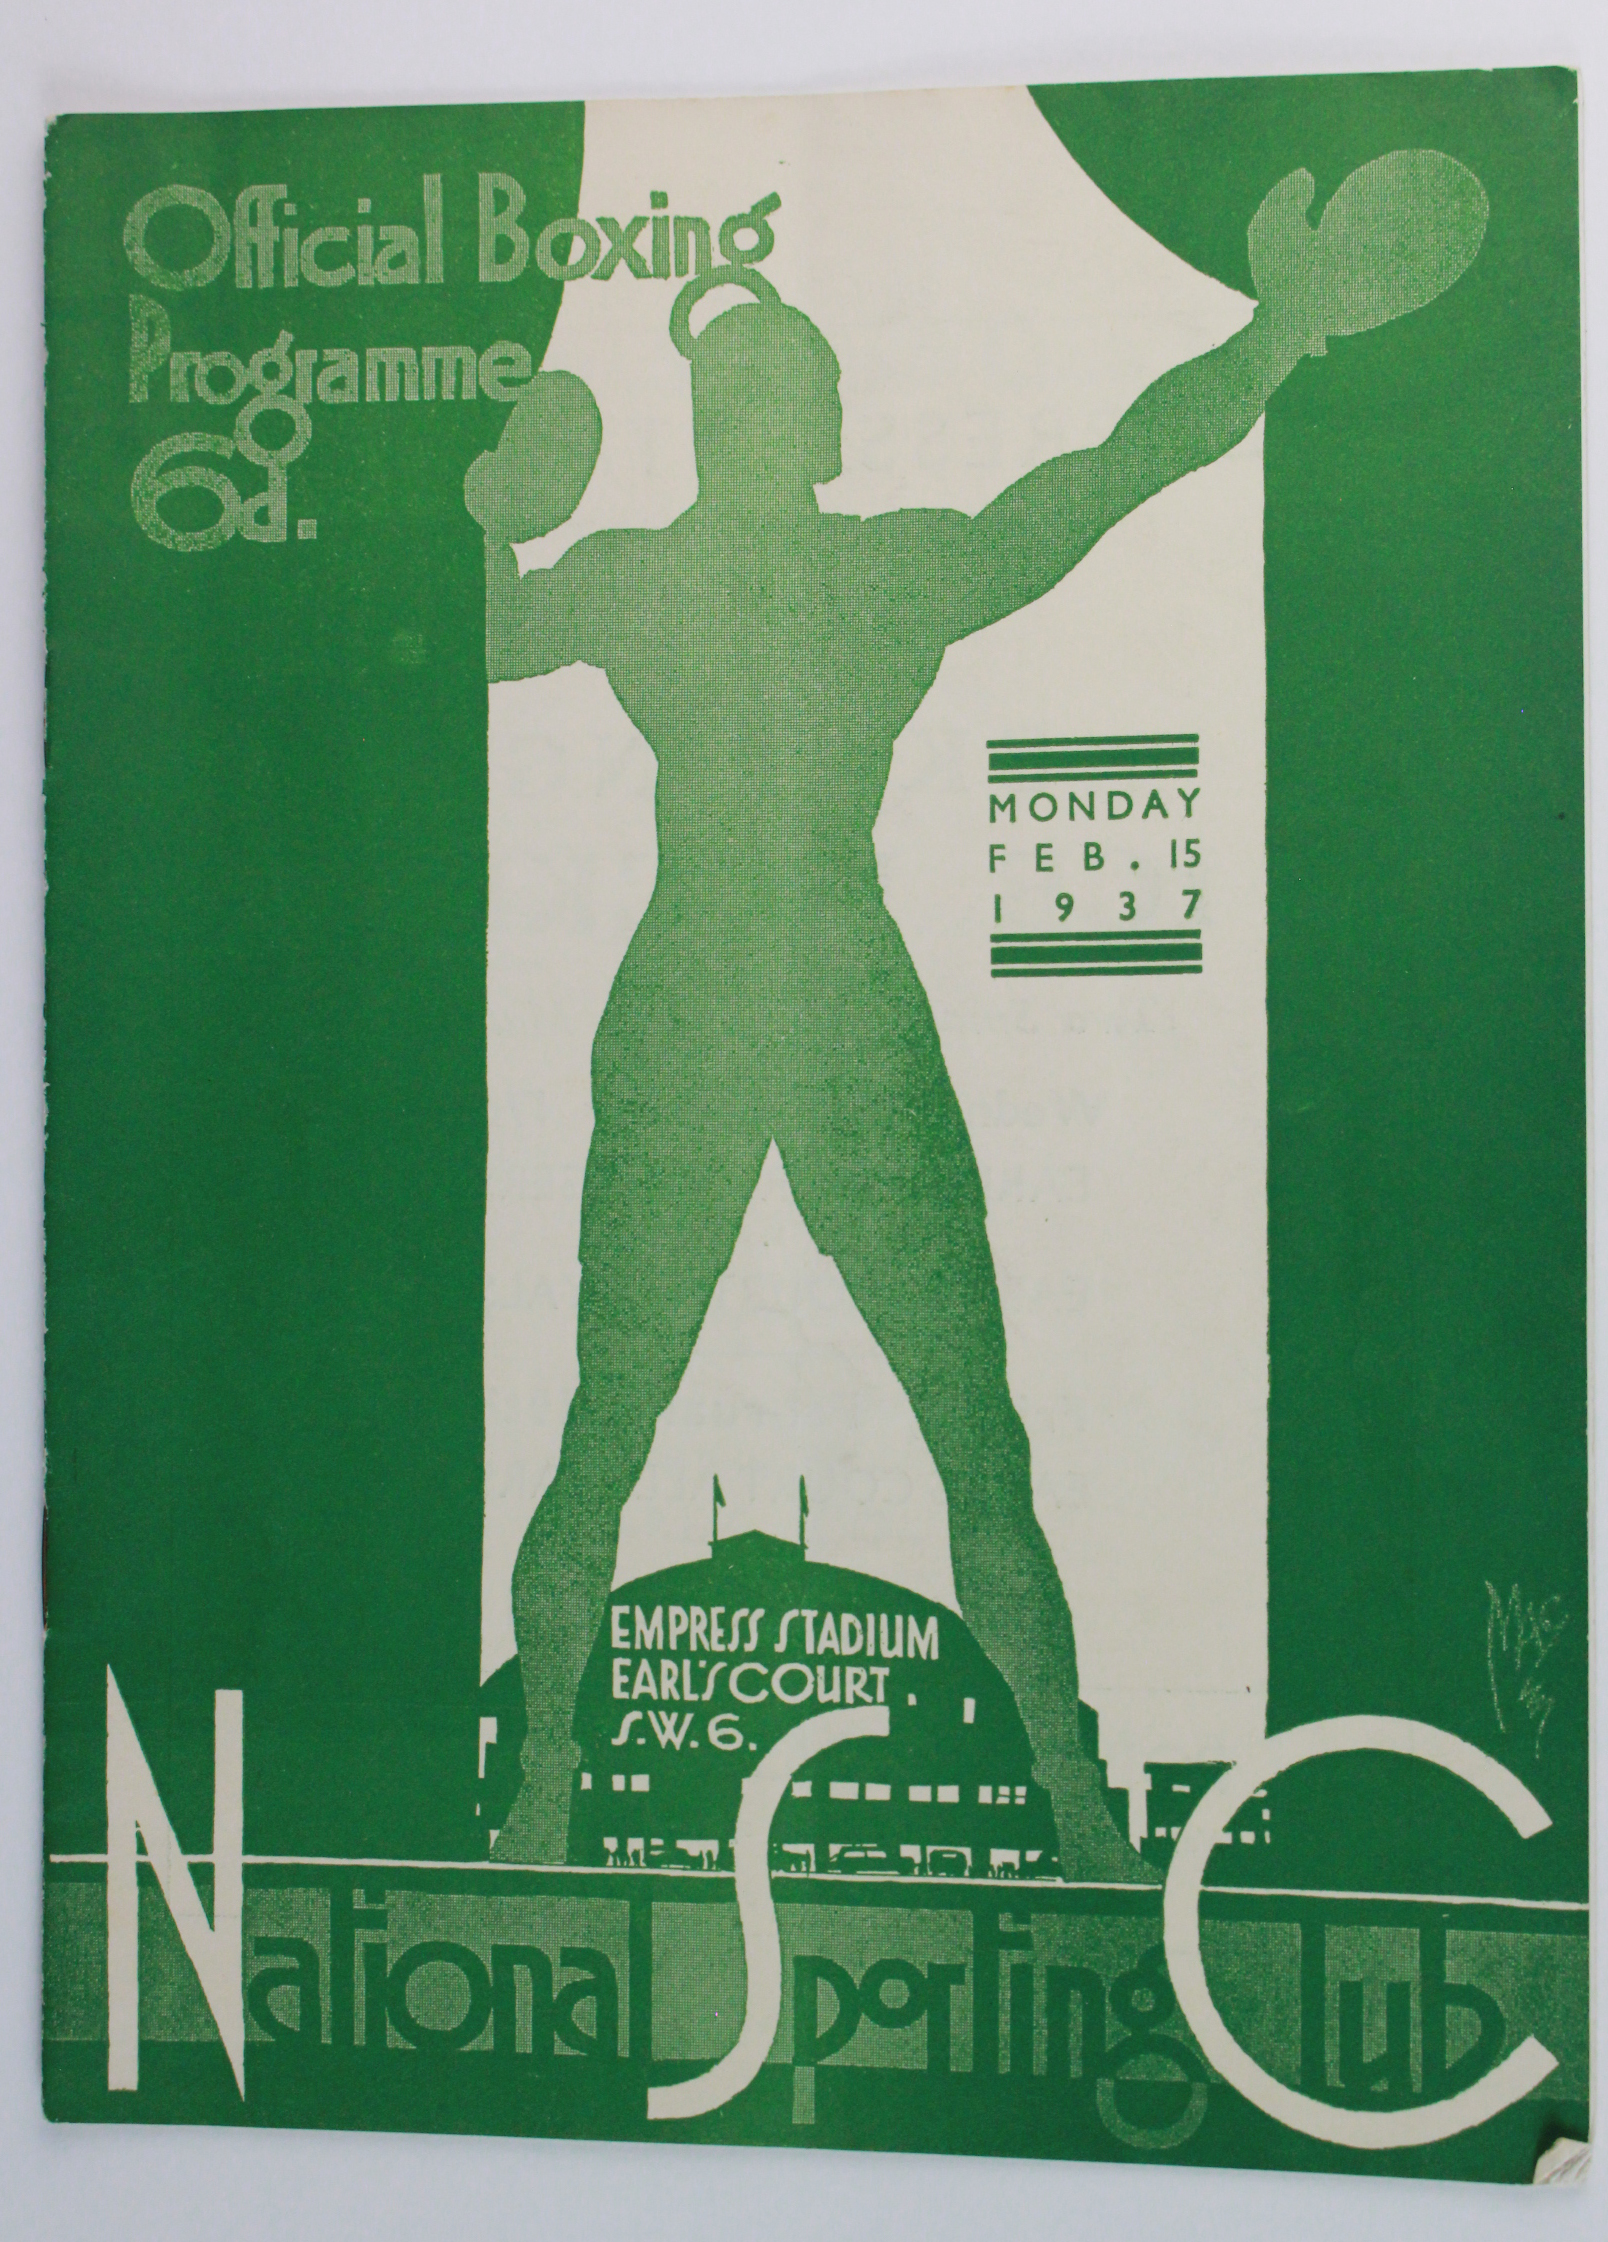 Boxing programme - National Sporting Club 15/2/1937 (1)